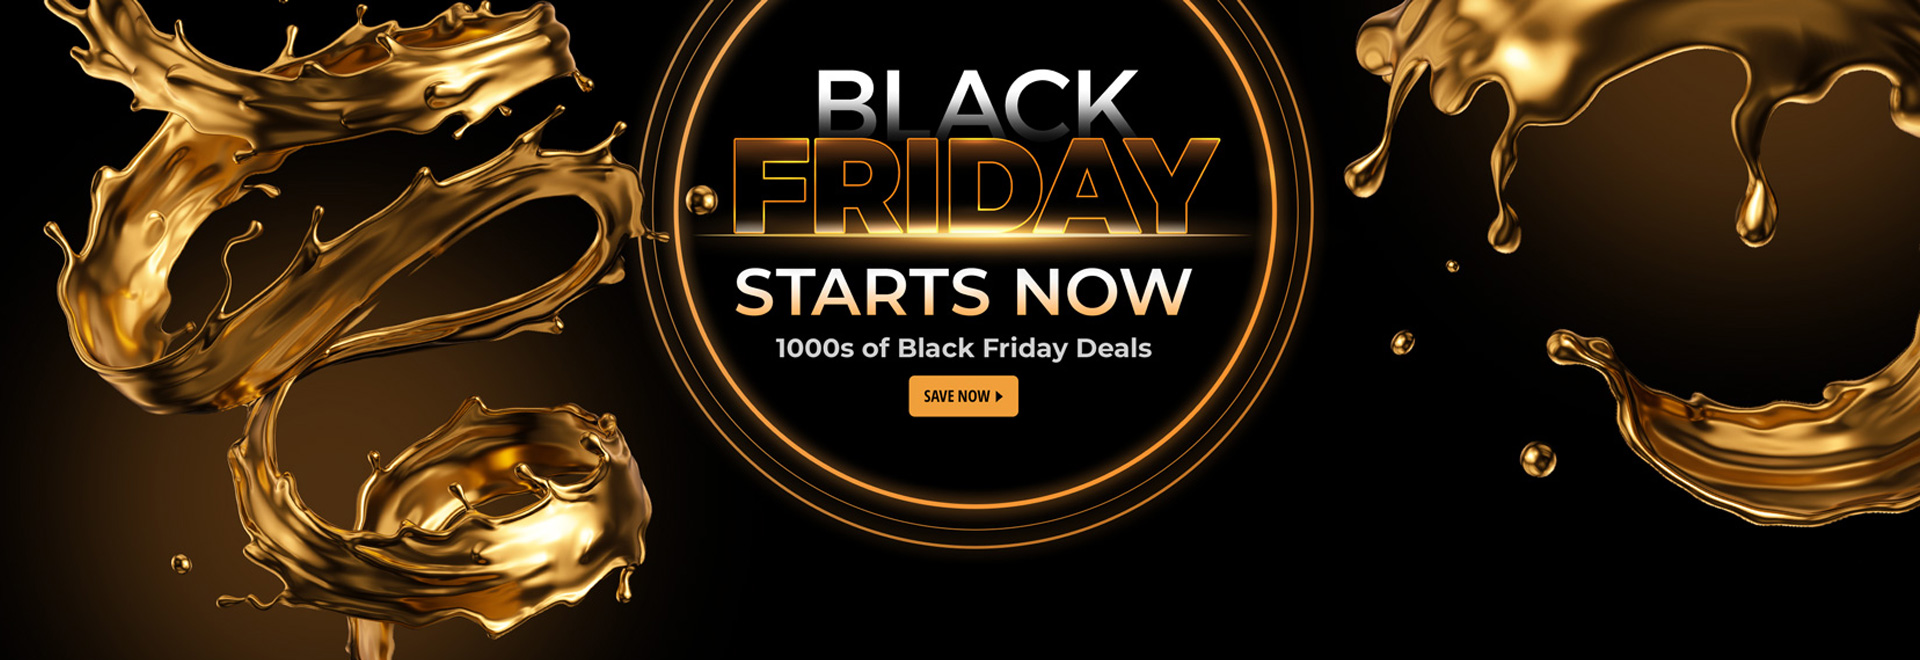 Newegg Details Upcoming Black Friday and Cyber Monday Sales